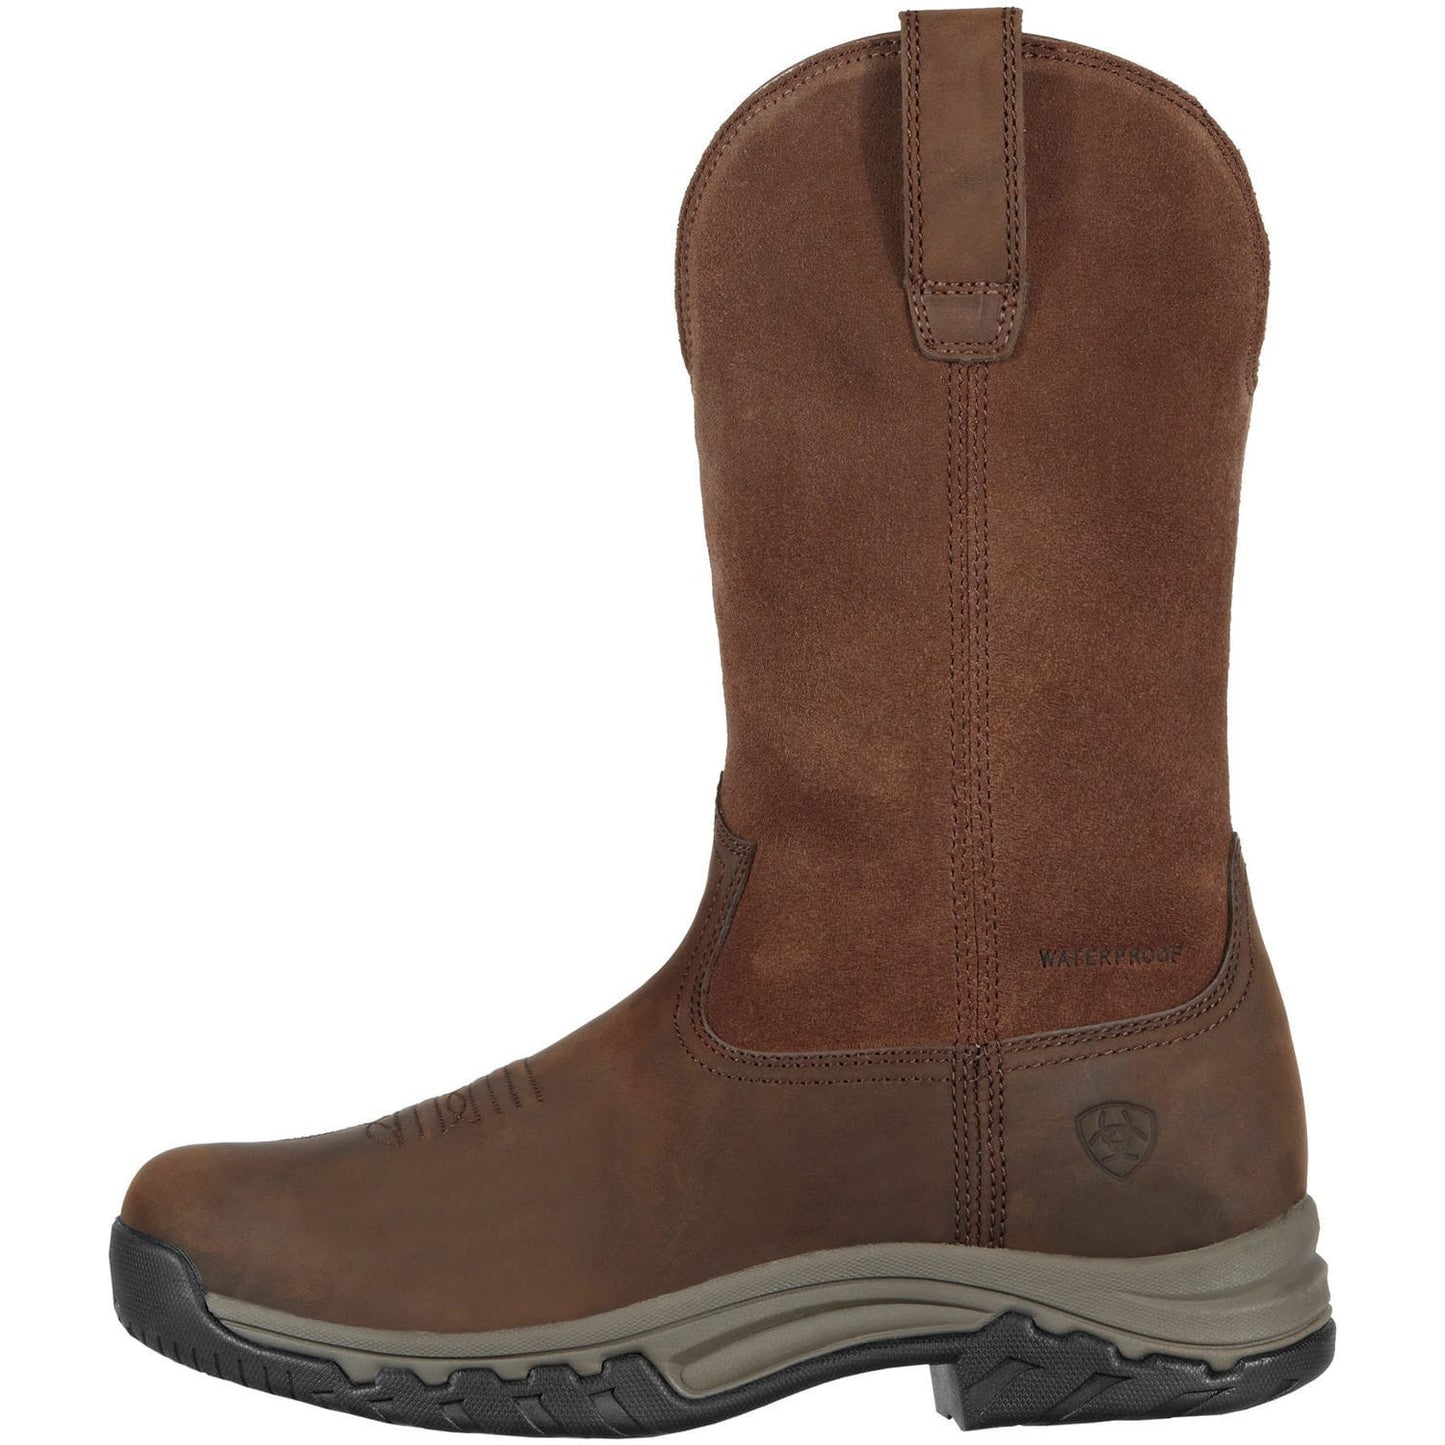 Load image into Gallery viewer, Ariat Ladies Terrain Pull-On H2O Brown Waterproof Boot 10011845 - Wild West Boot Store
